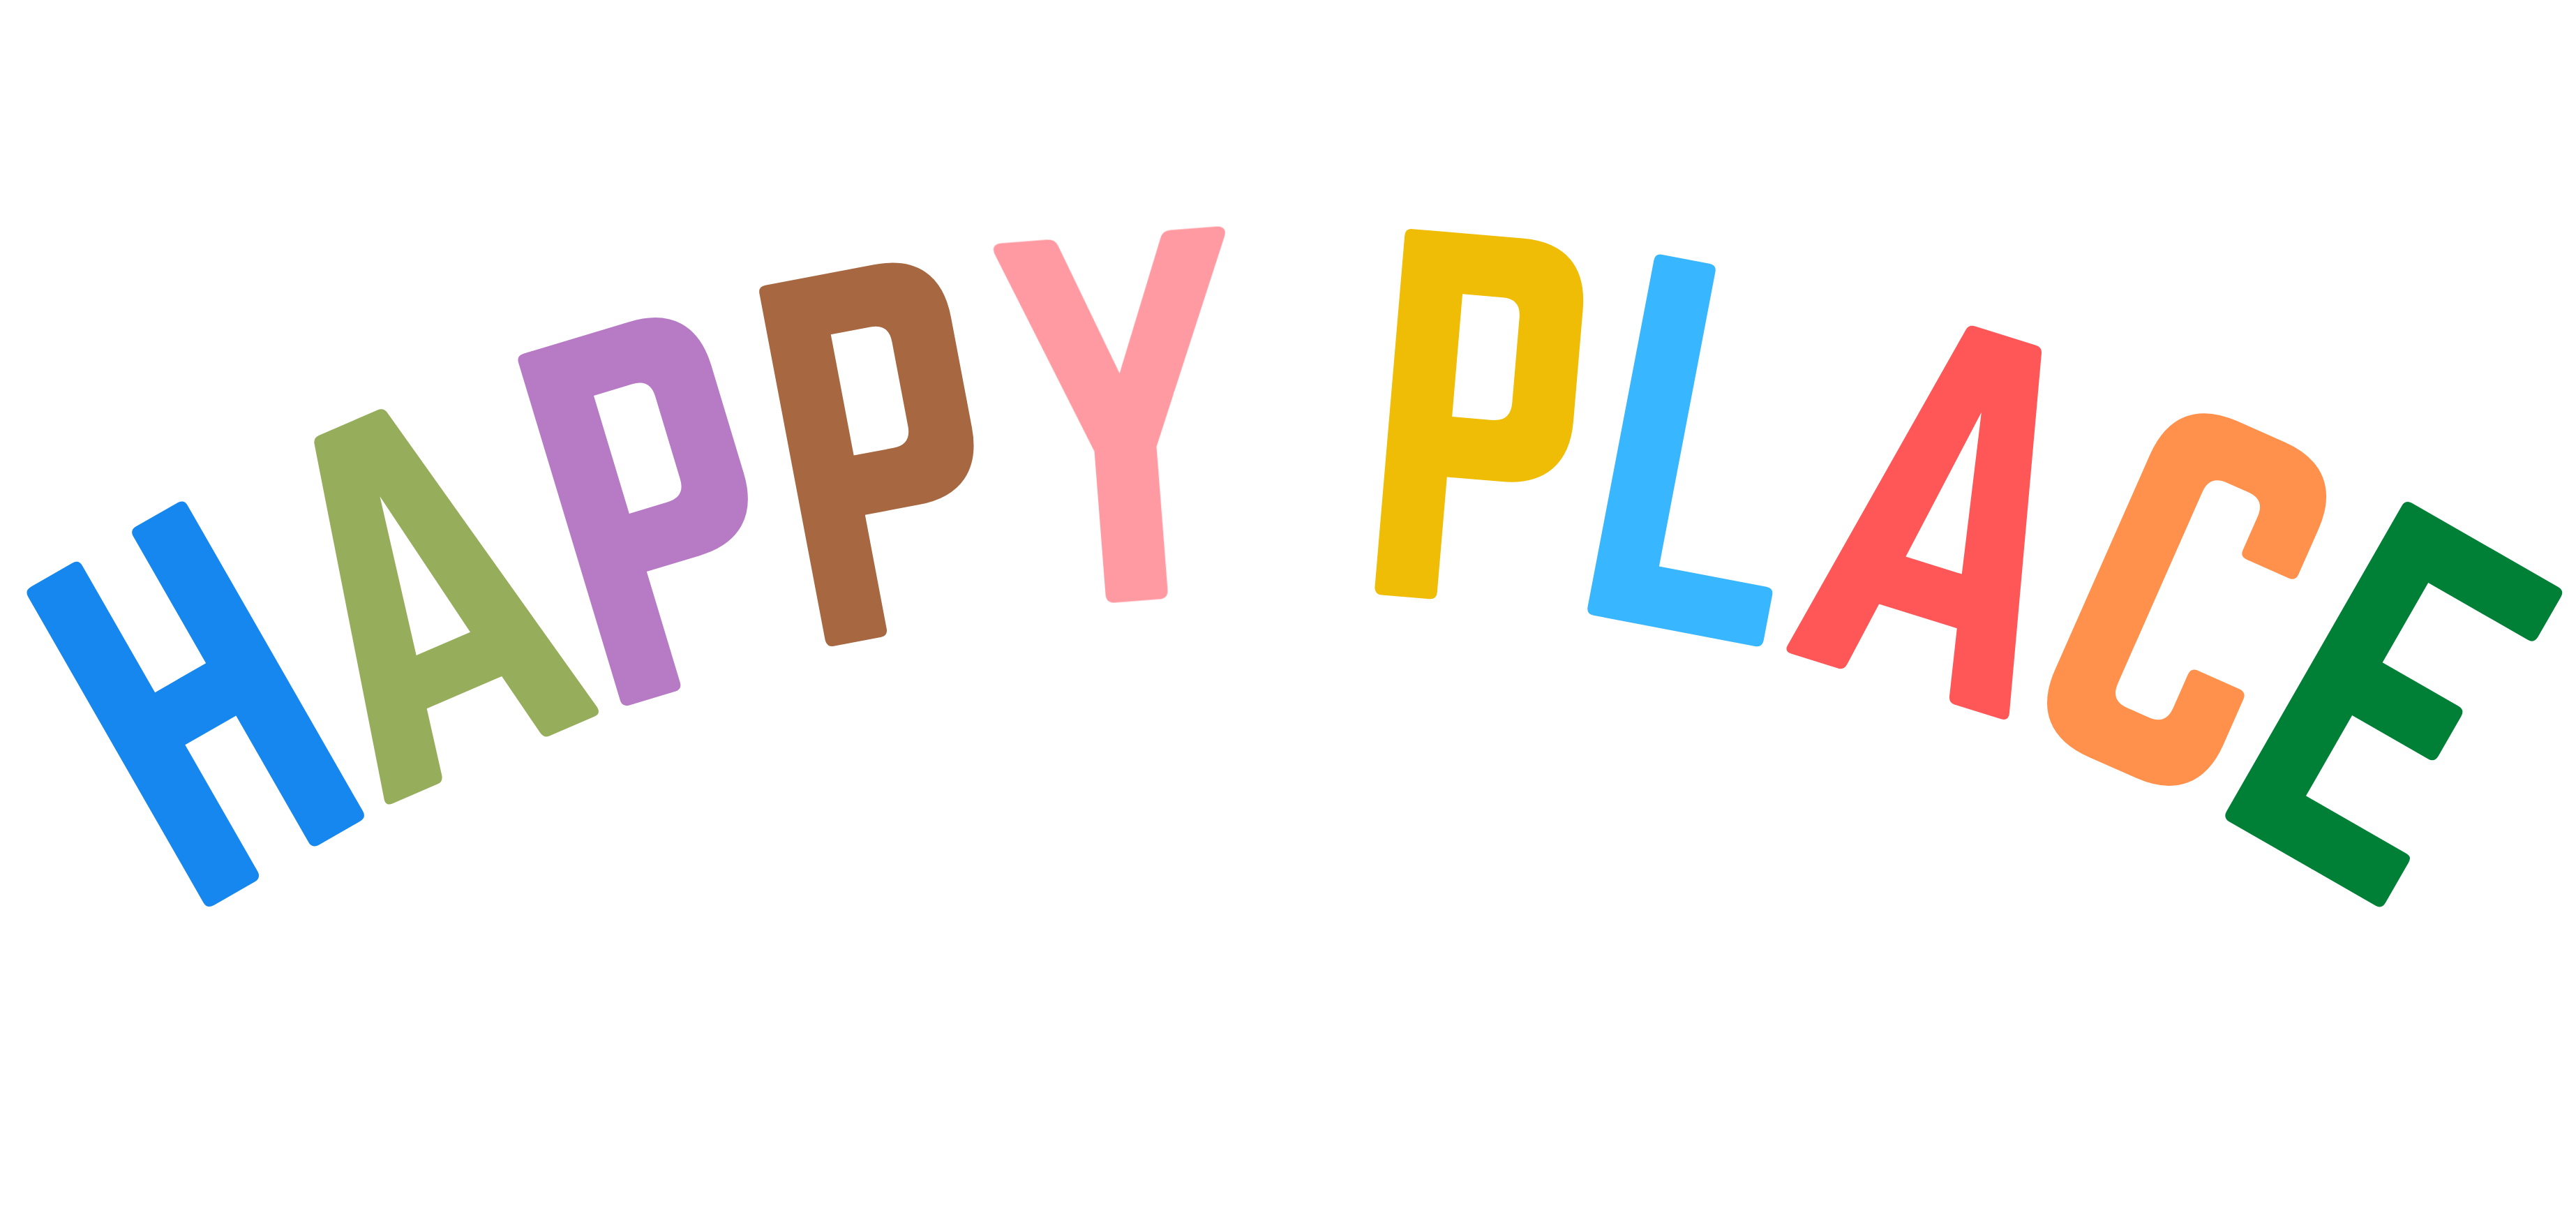 happy place tee cute new shirt spring tshirt outfit idea